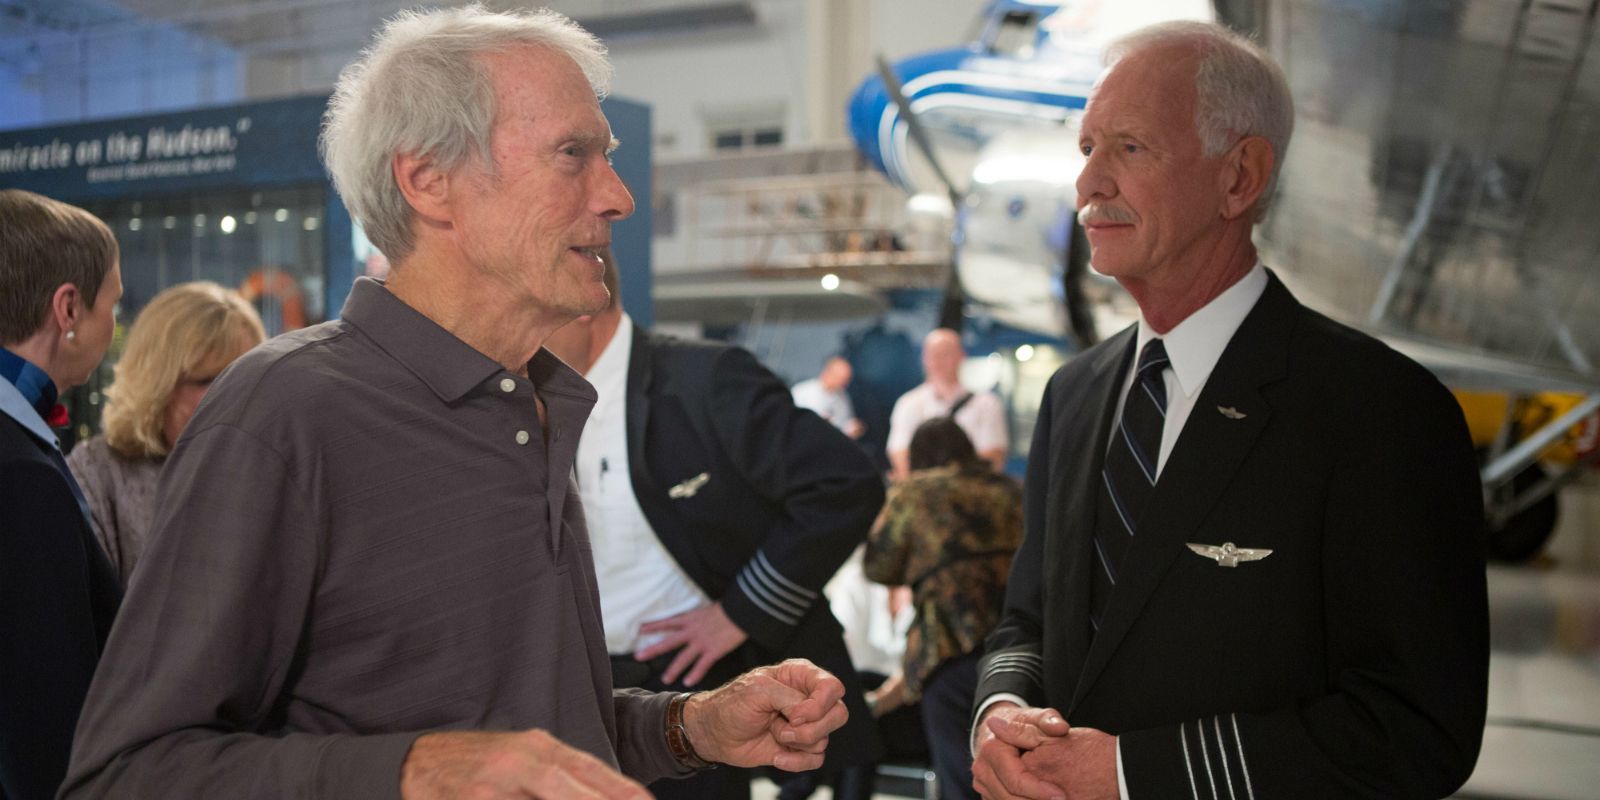 Clint Eastwood and the real Chesley 'Sully' Sullenberger